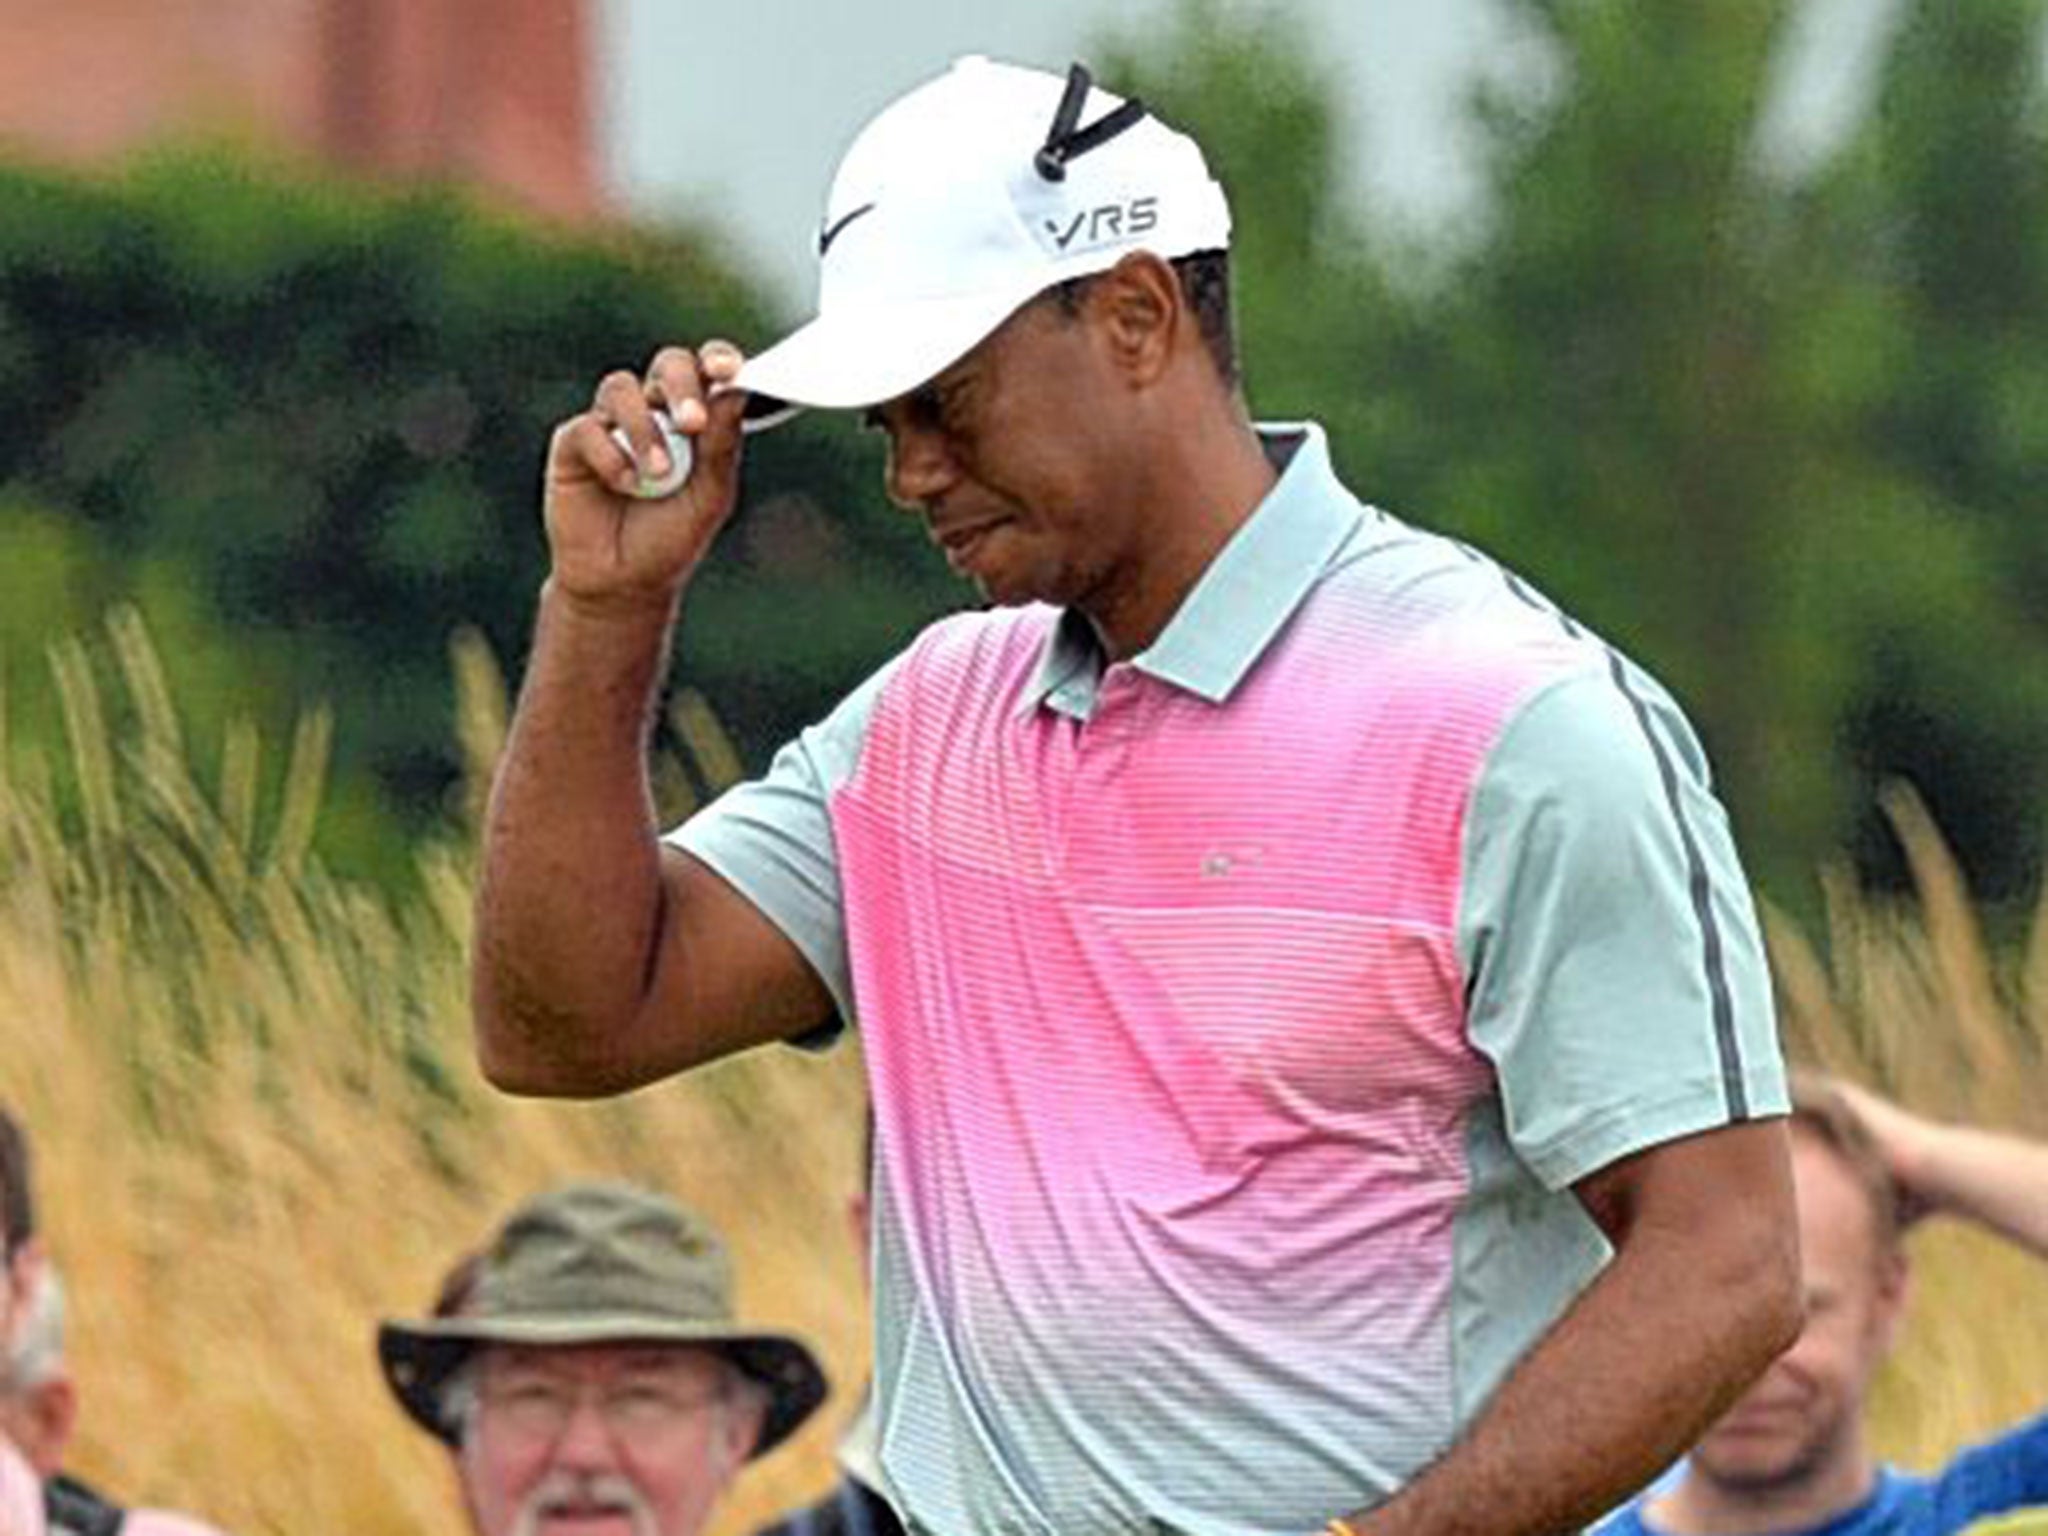 Tiger Woods struggled on day three at the Open